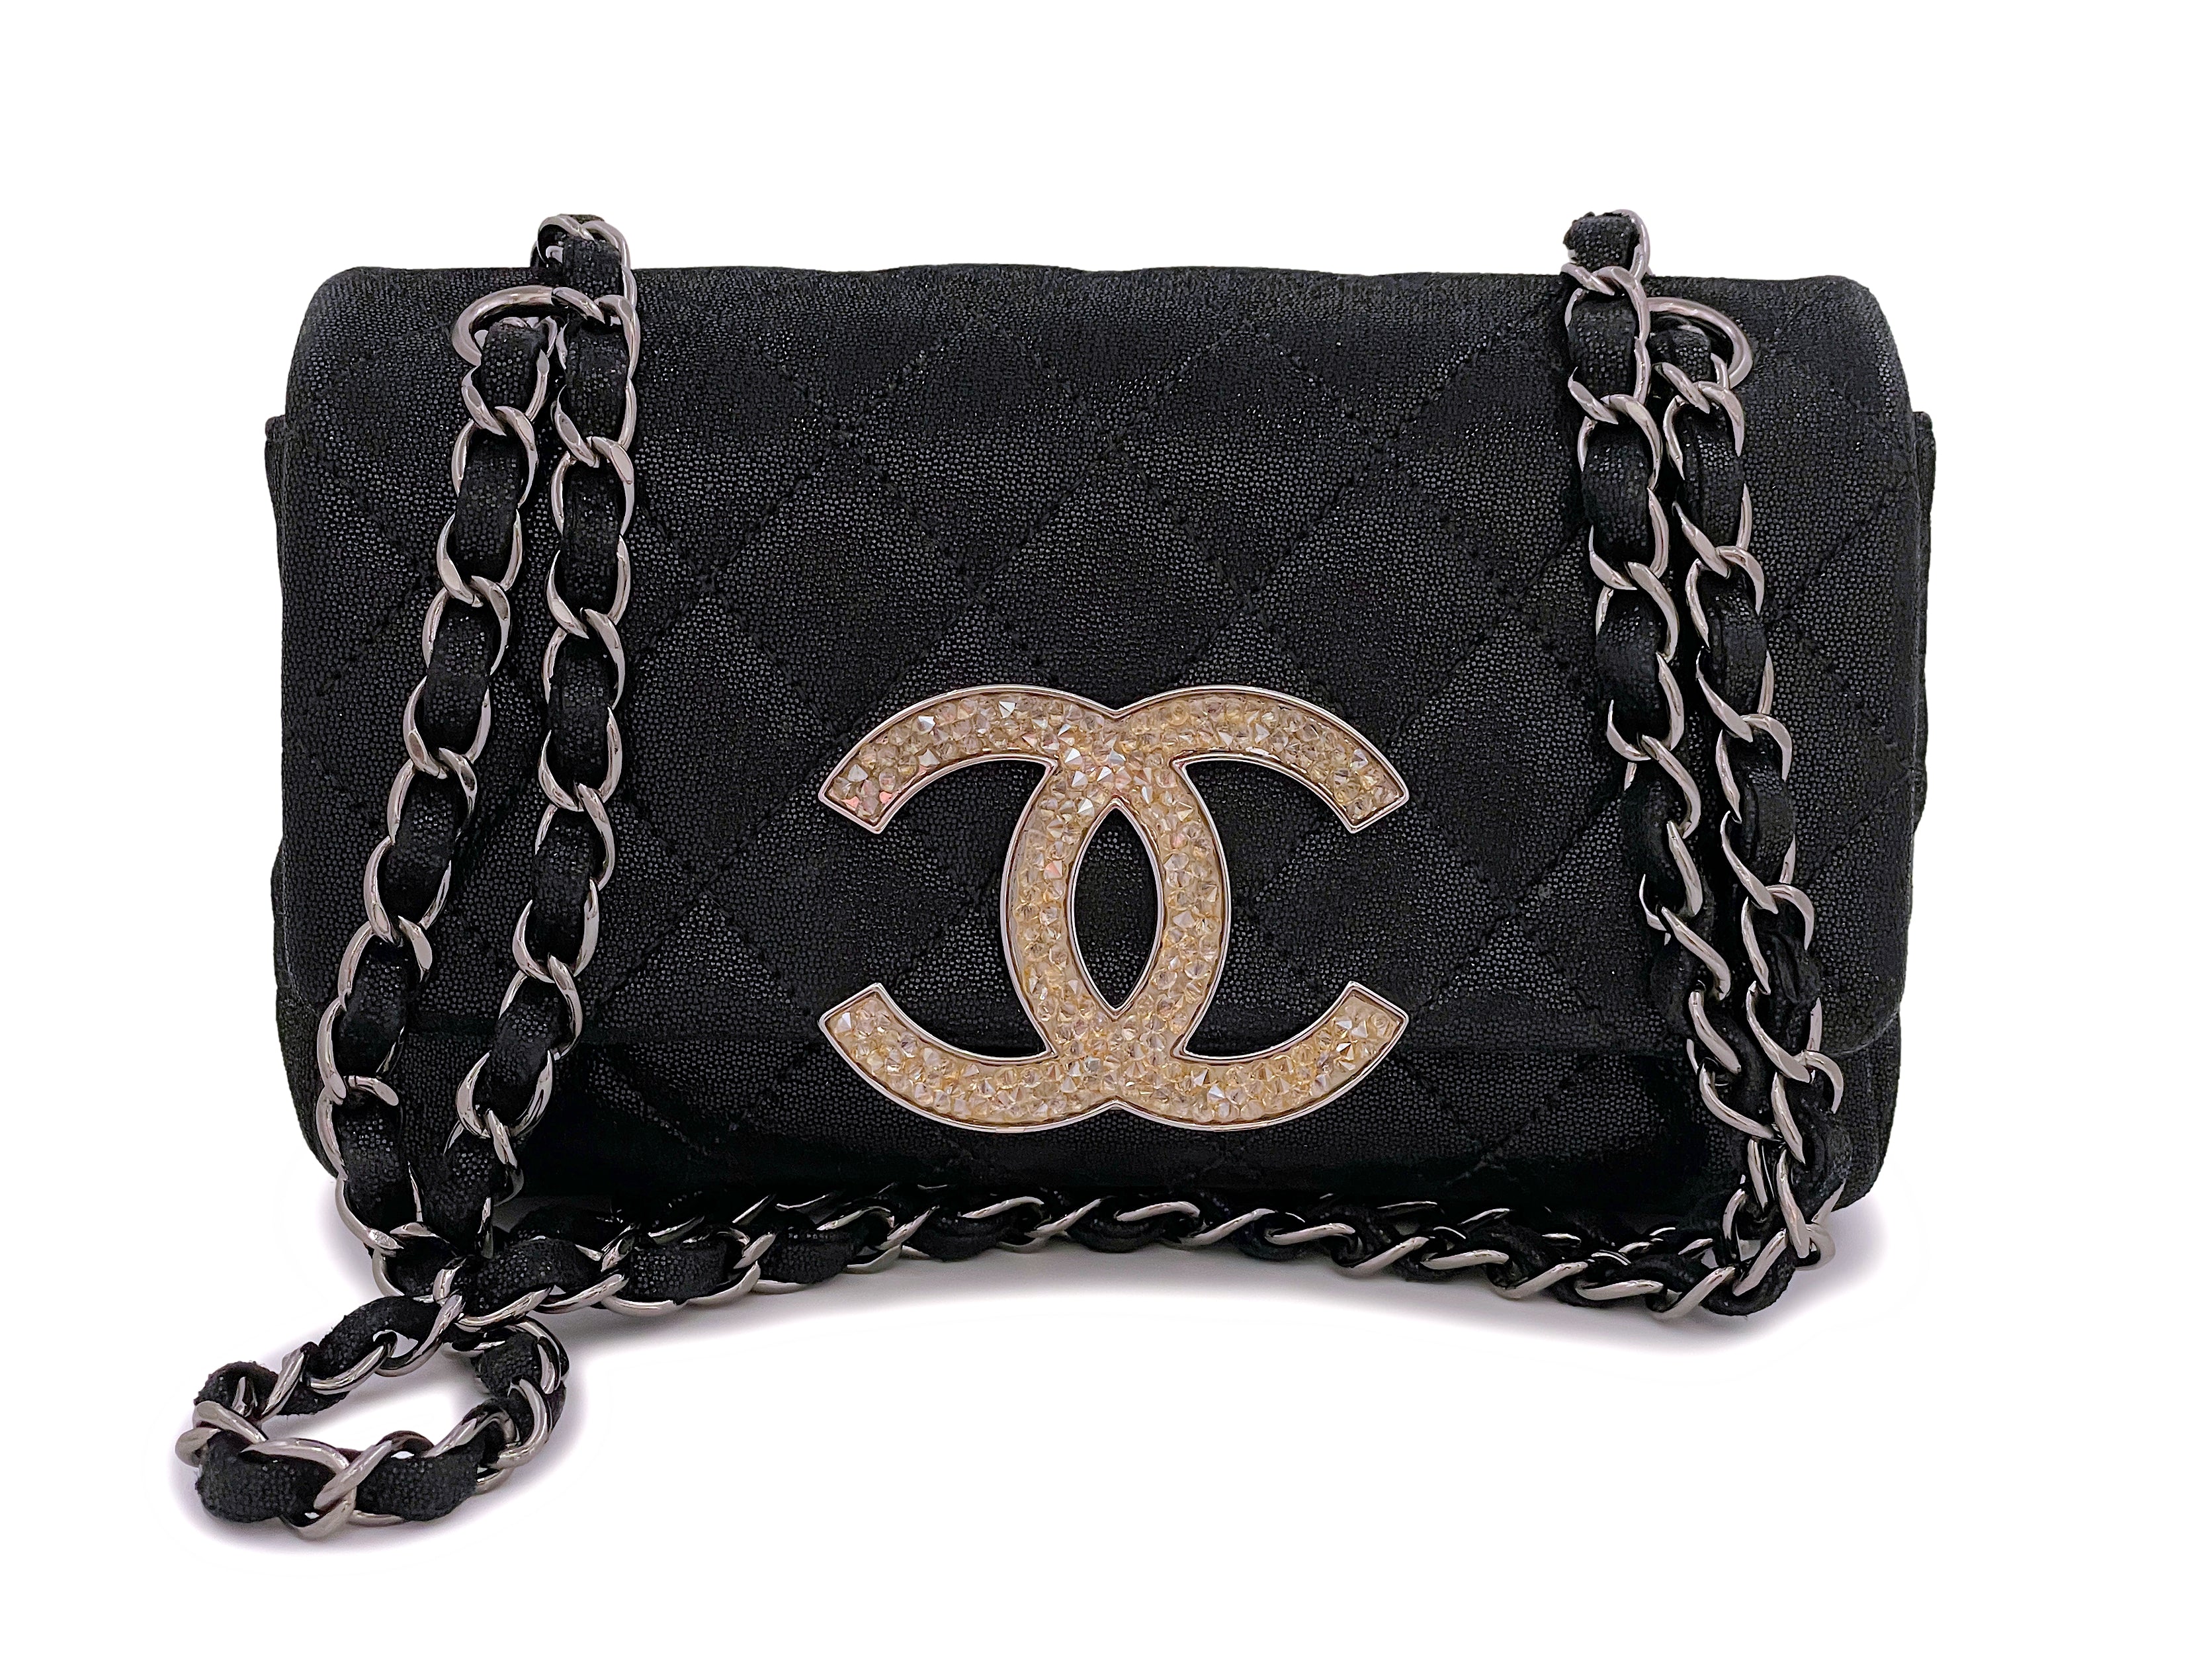 silver chanel wallet on